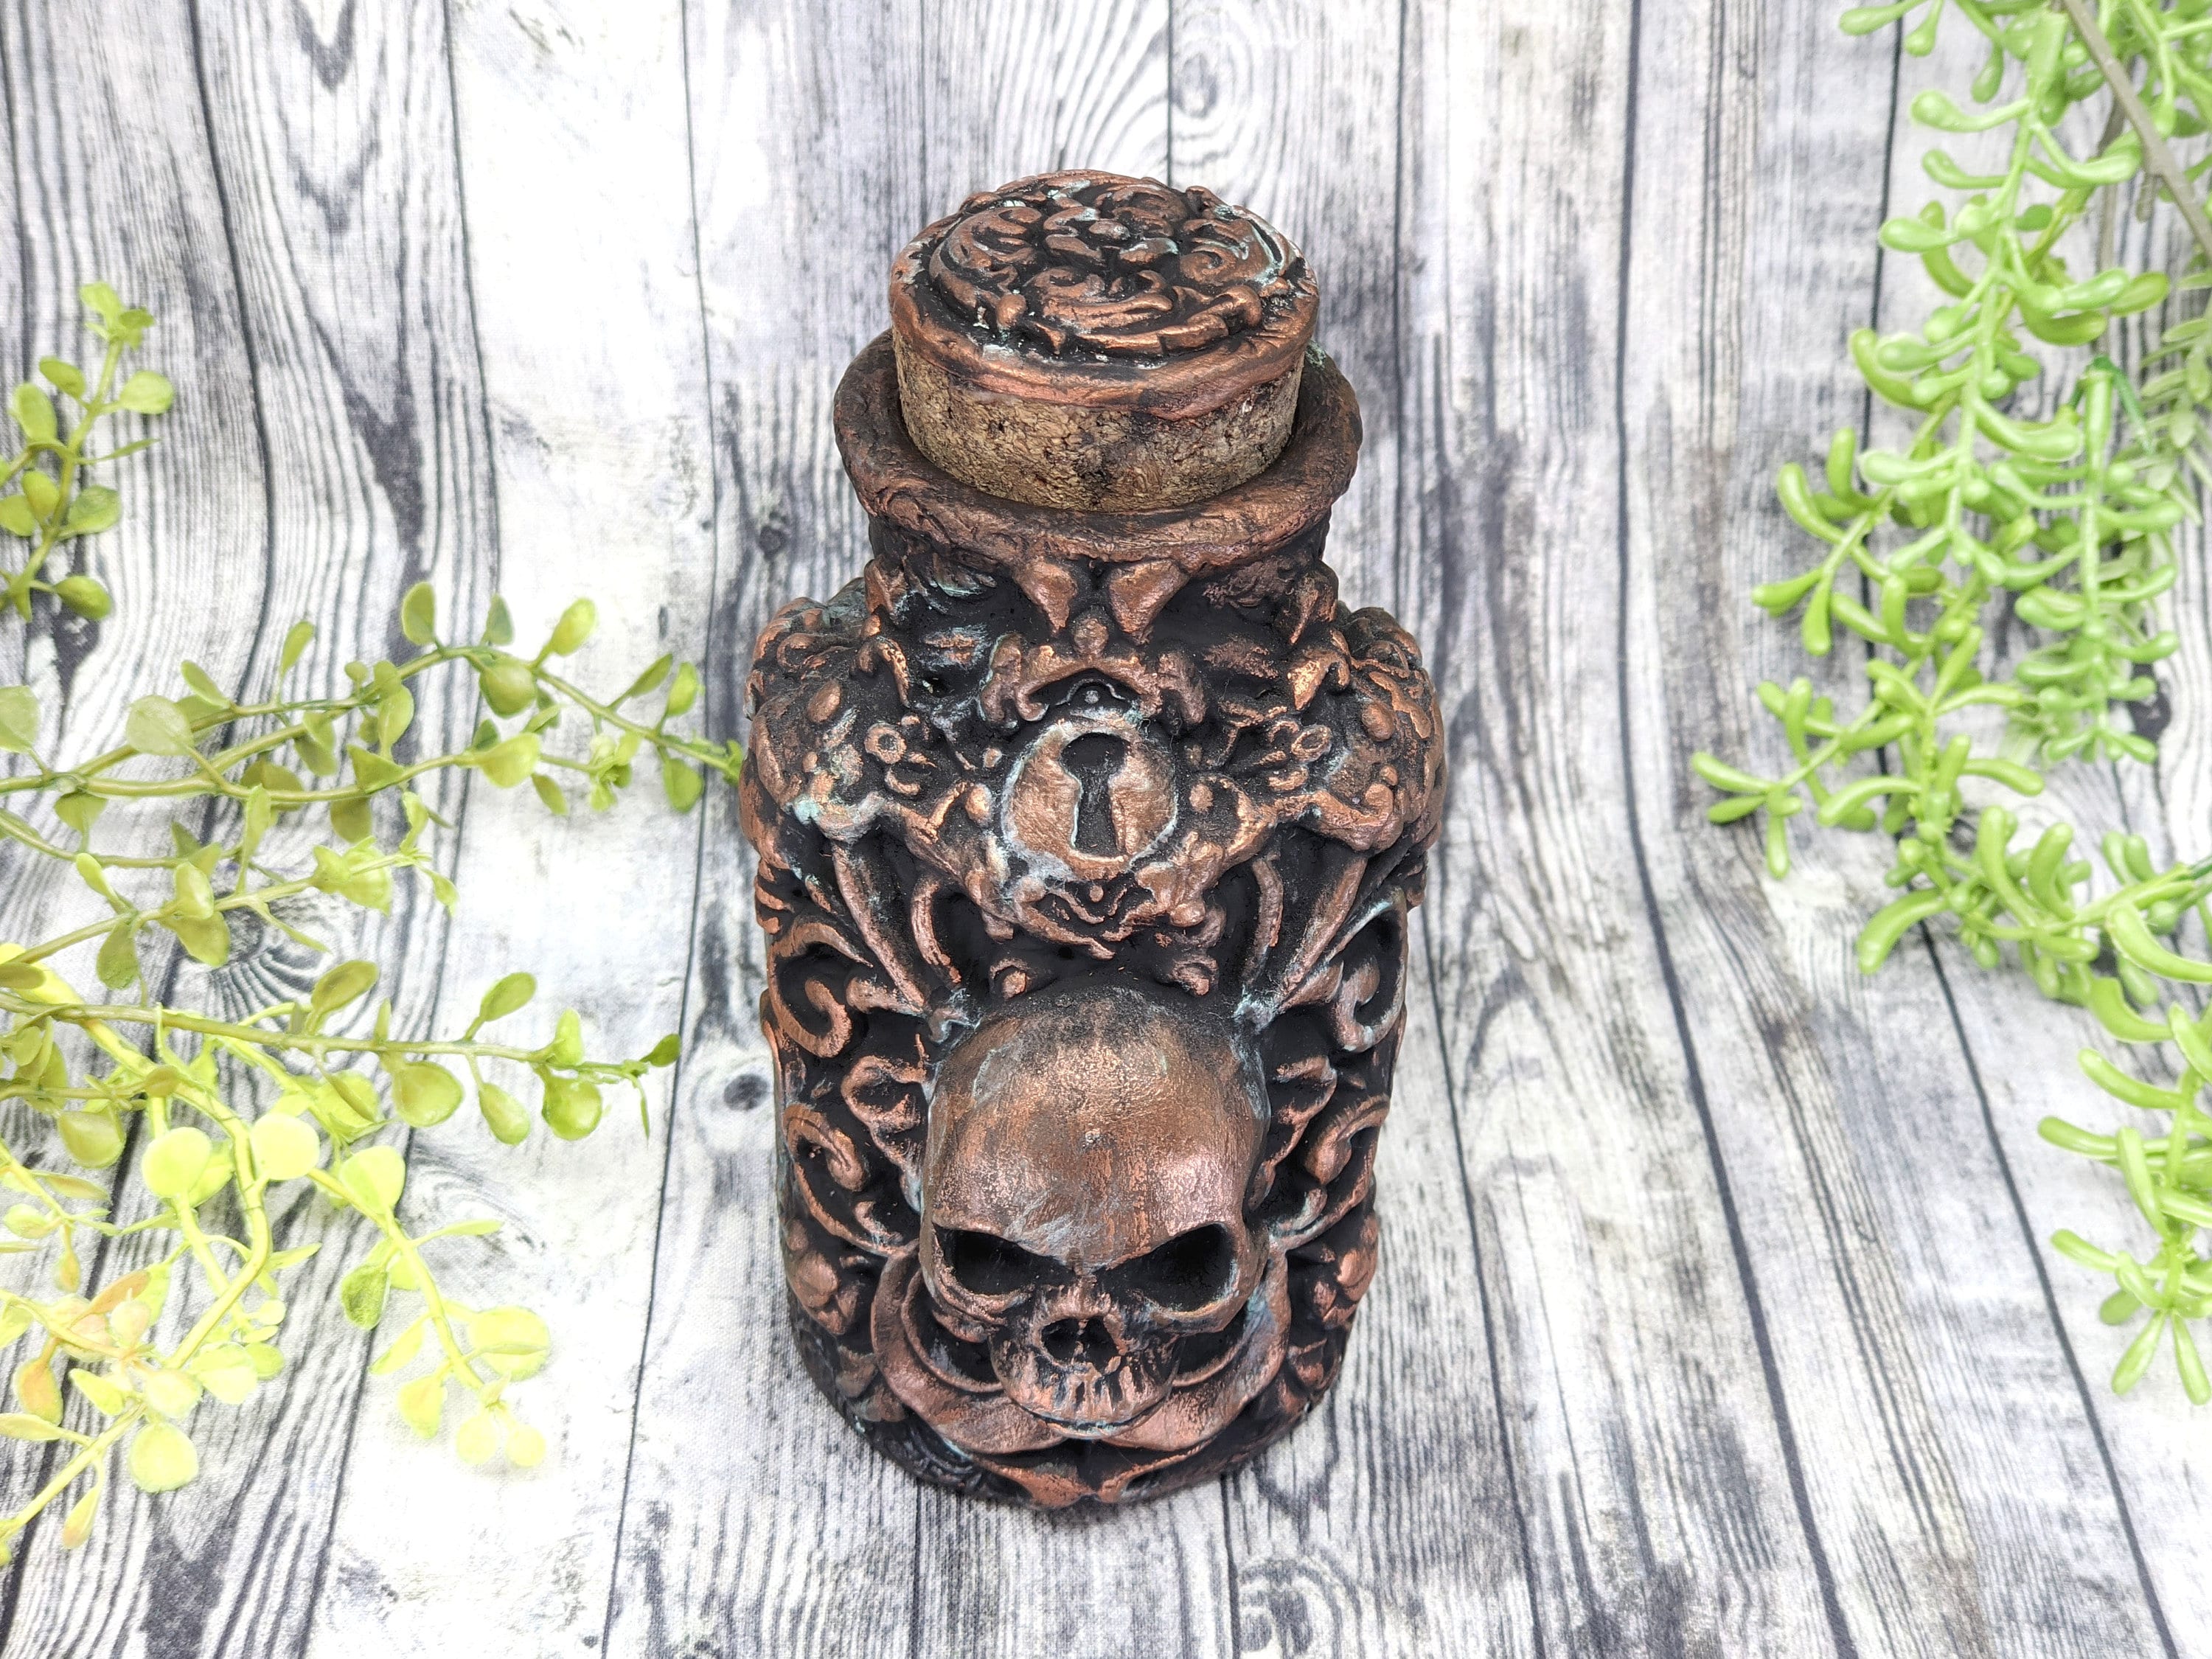 Copper Skull Apothecary Jar Potion Bottle / Poison Wiccan Altar Clay  Apothecary Bottle Gothic Home Decor Witchy Decor Goth Witch Pagan Gifts -   Canada